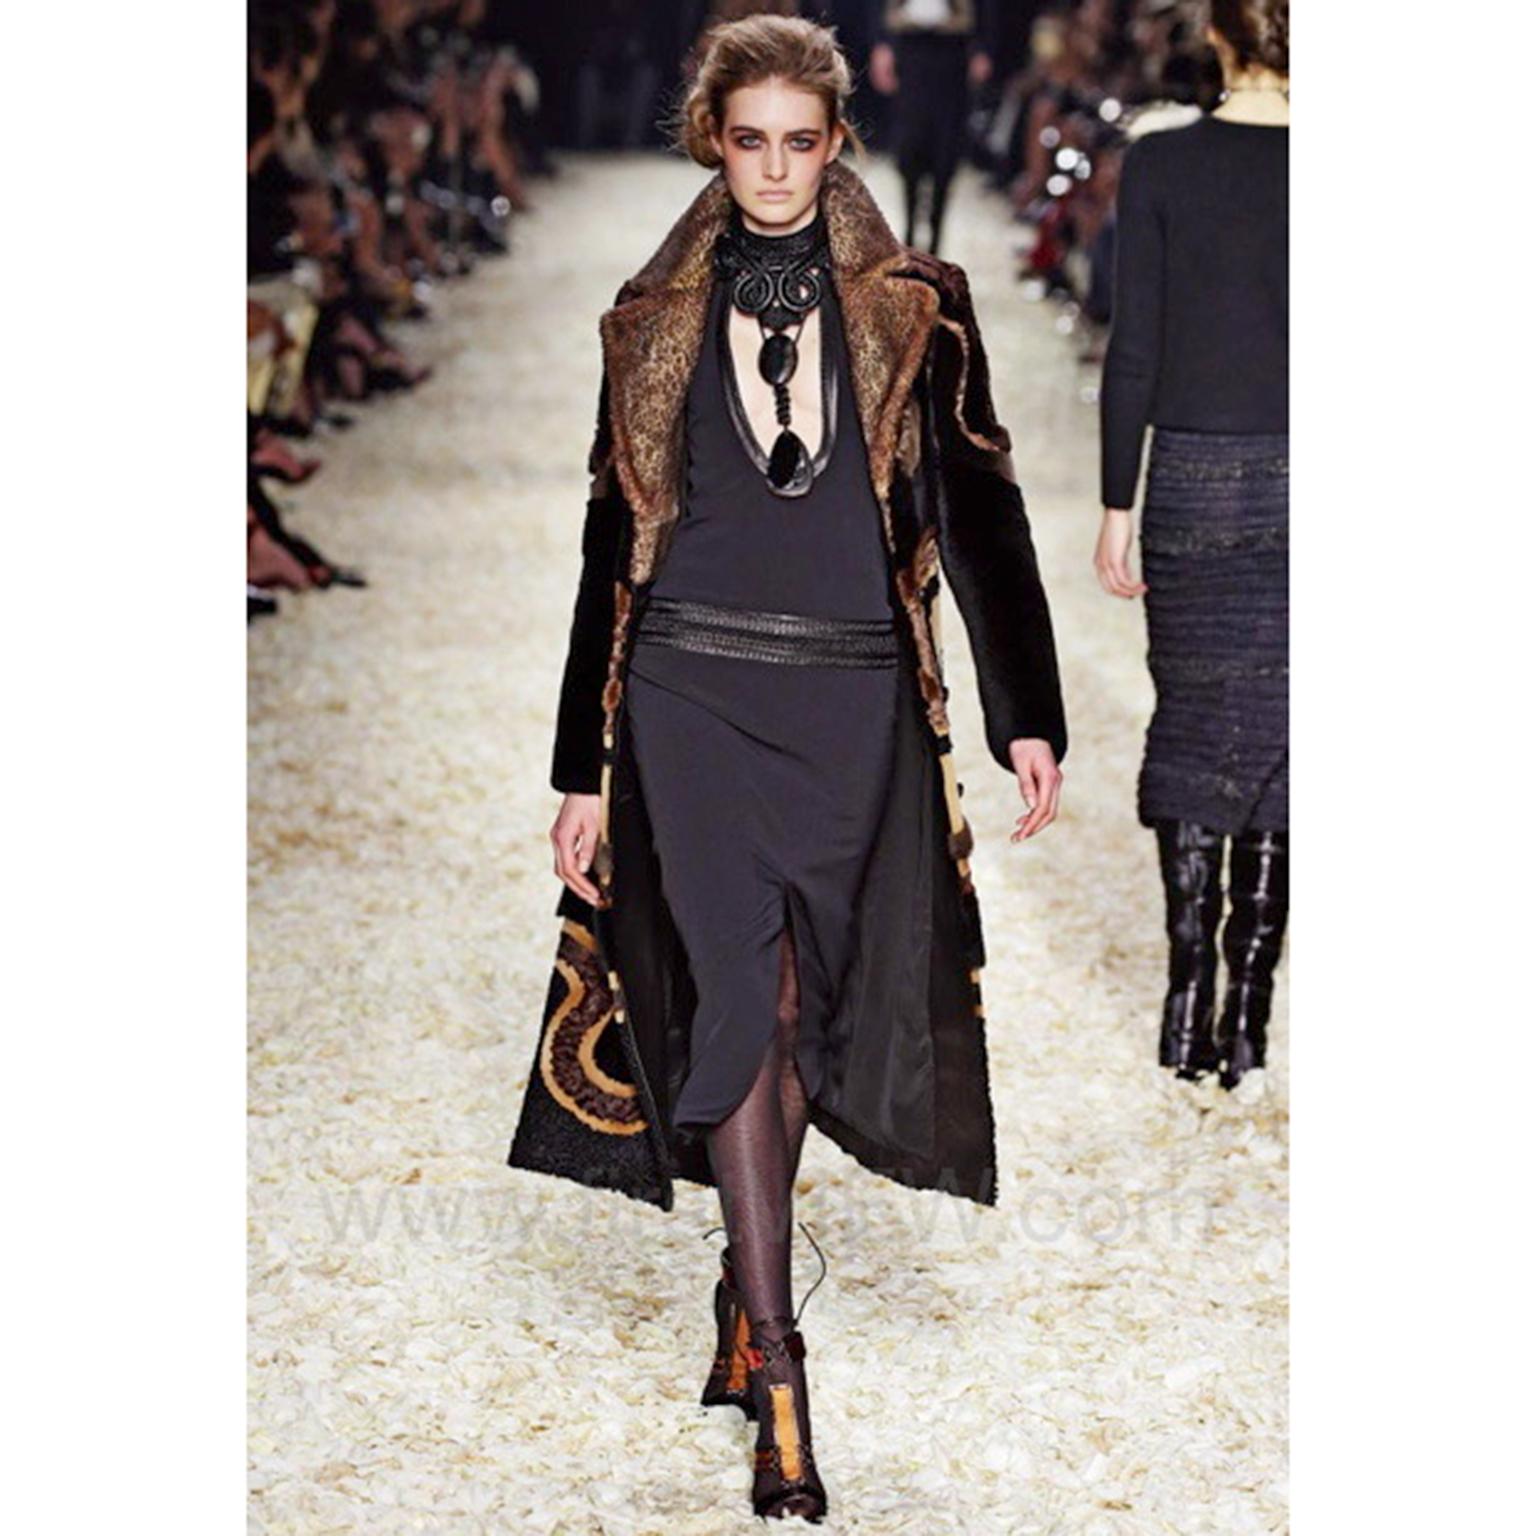 We love this Tom Ford F/W 2015 dress! The dress was featured on the runway and is so unique with its incredible leather details. The bodycon dress has a braided leather band collar around the neck that continues throughout the bust. There is a very